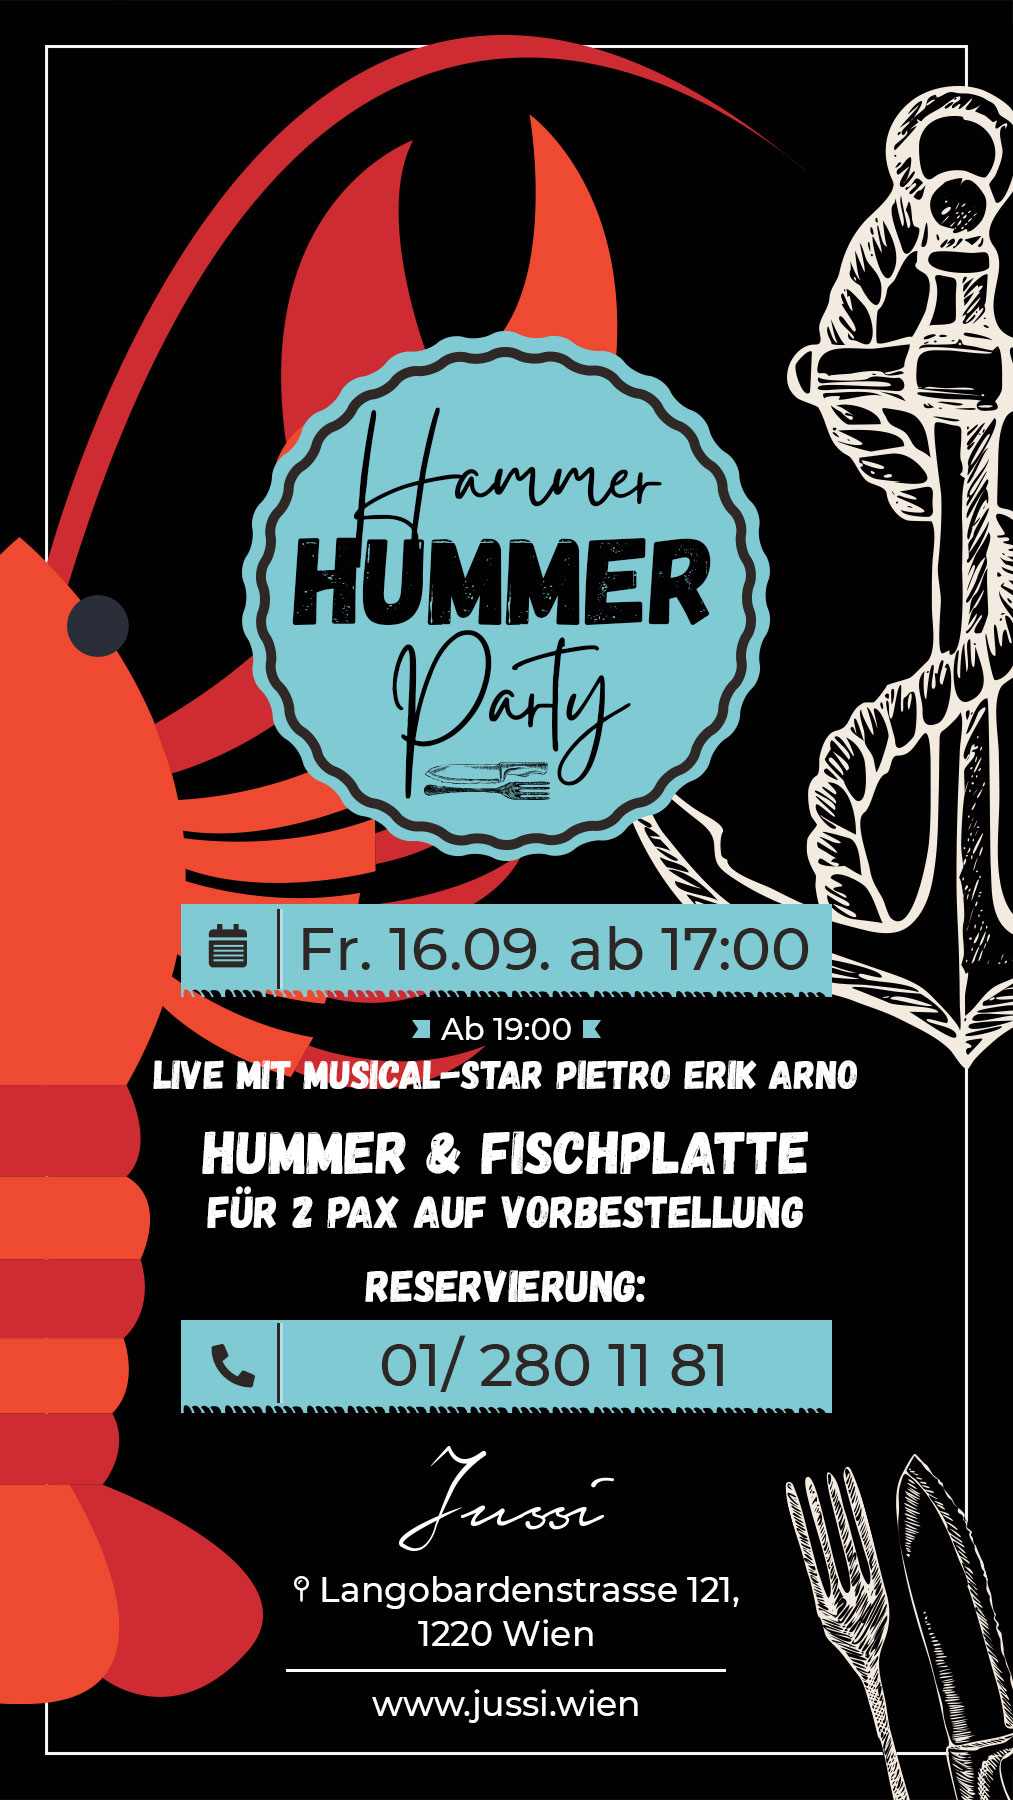 Jussi | Hammer Hummer Party